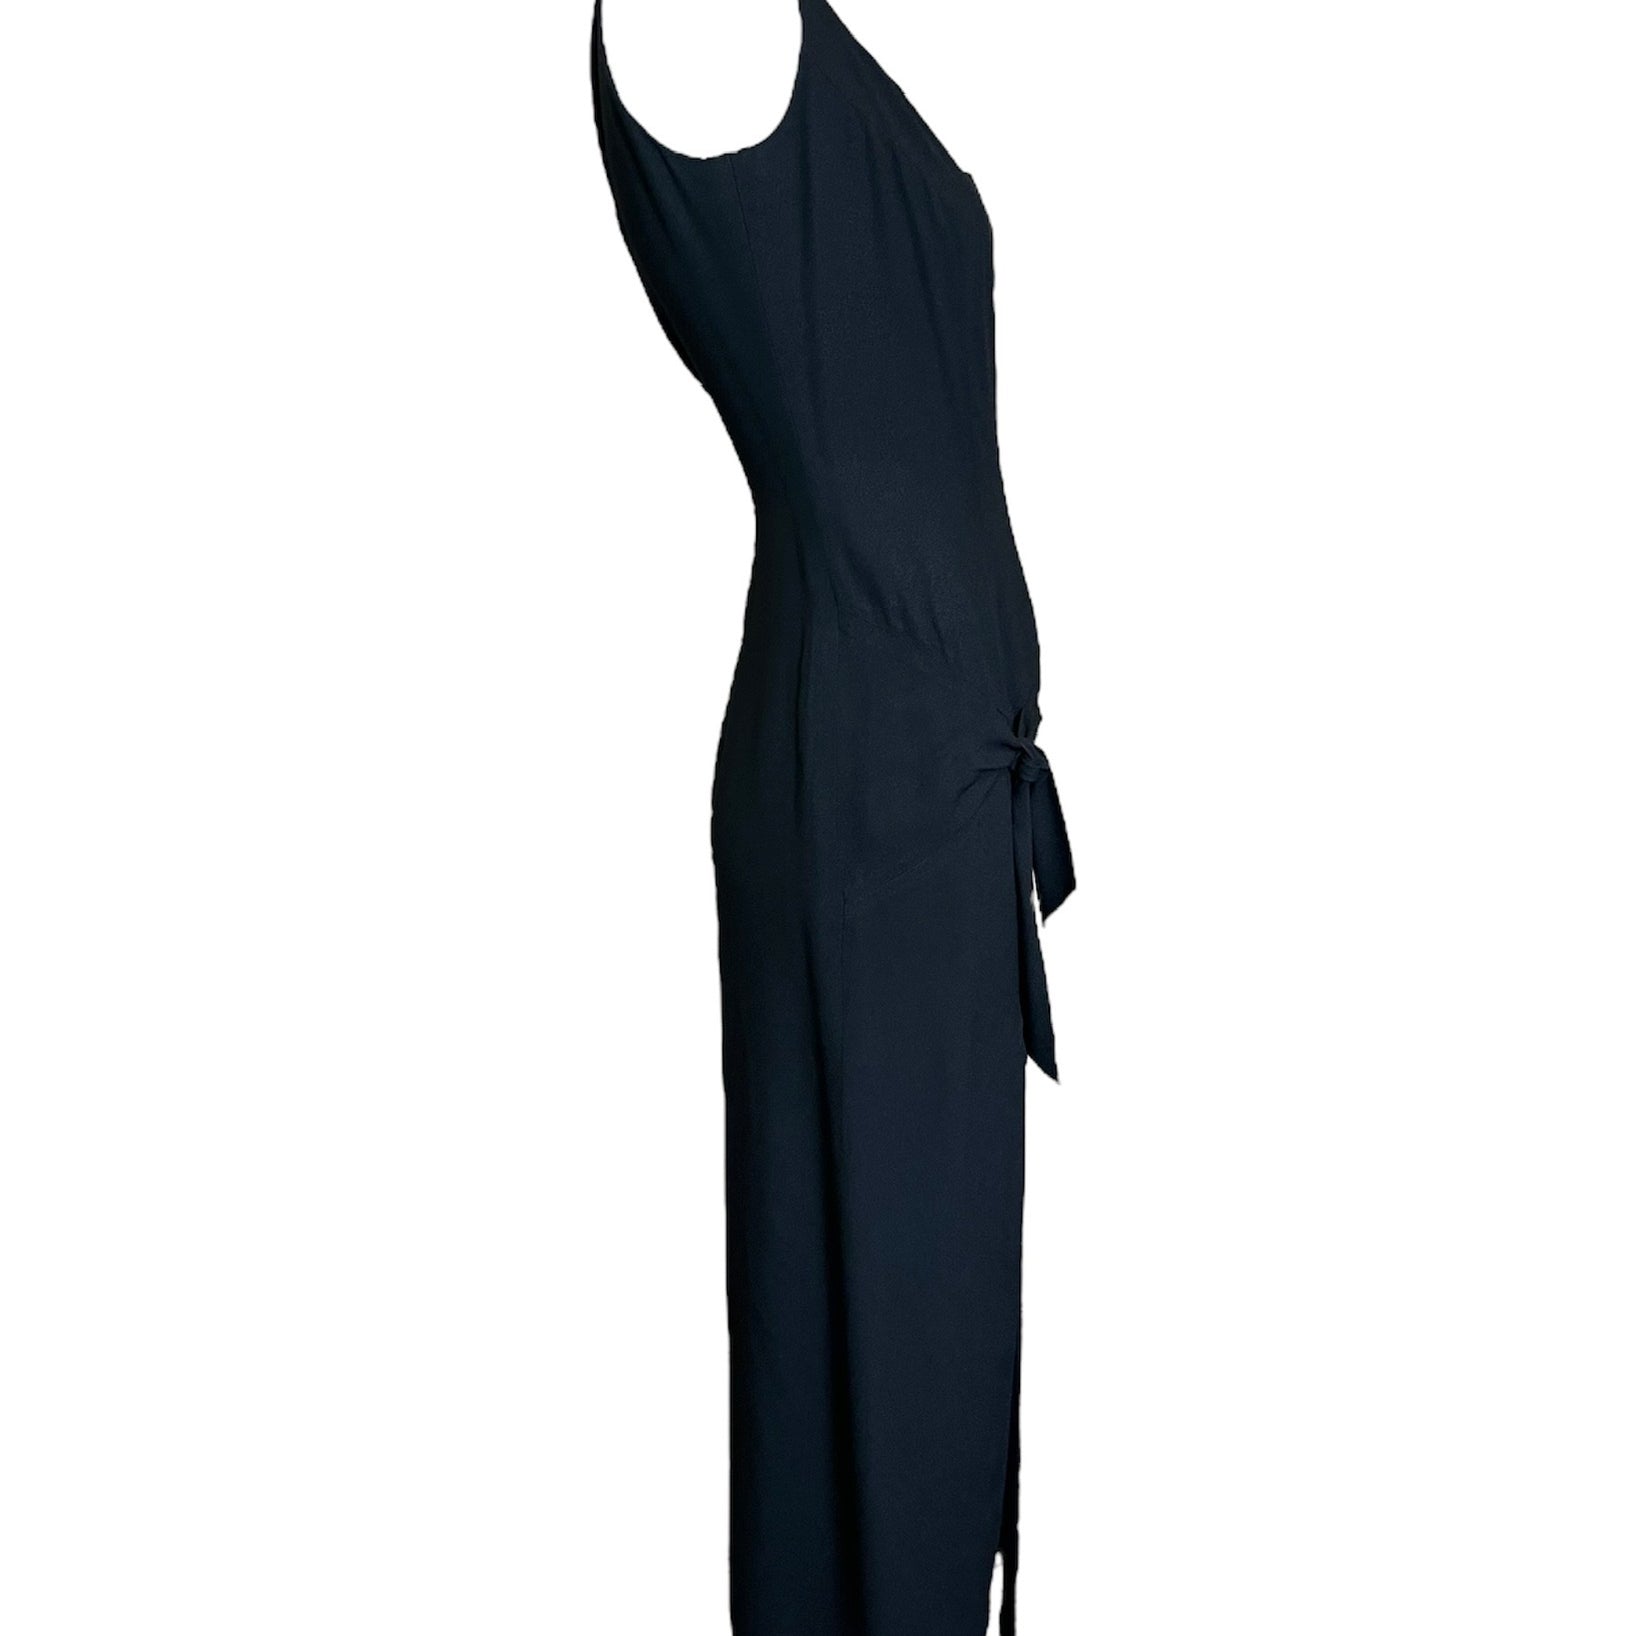 Galliano Black Crepe Silk-lined Dress with Knotted Waist SIDE PHOTO 2 OF 4